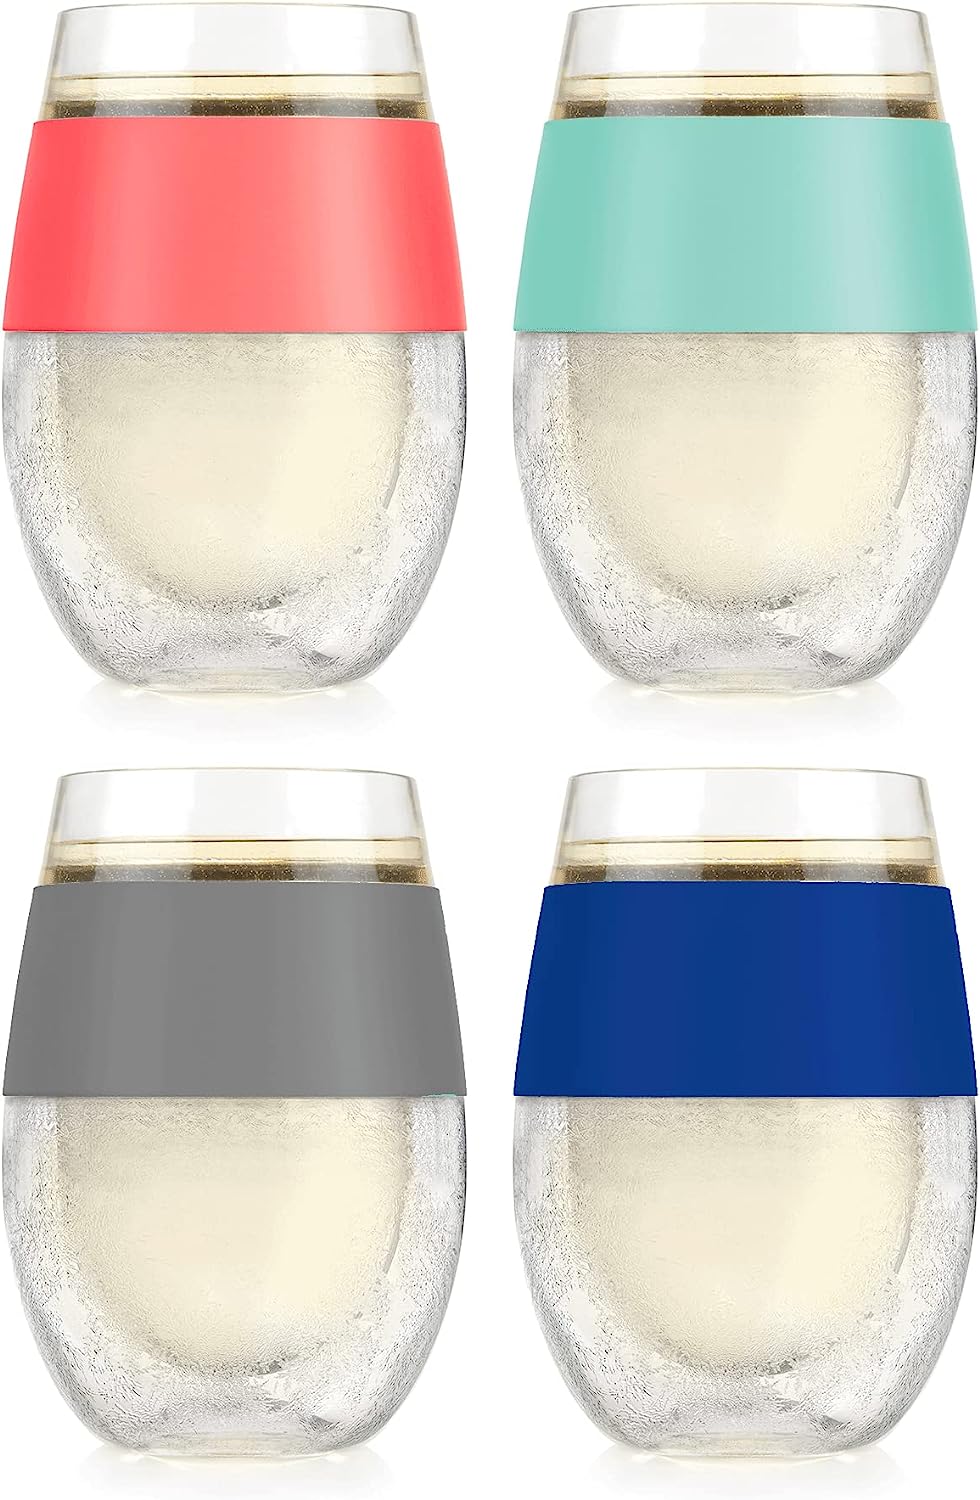 Freeze-Gel Insulated Beverage Cups (4) Keeps Drink Cold